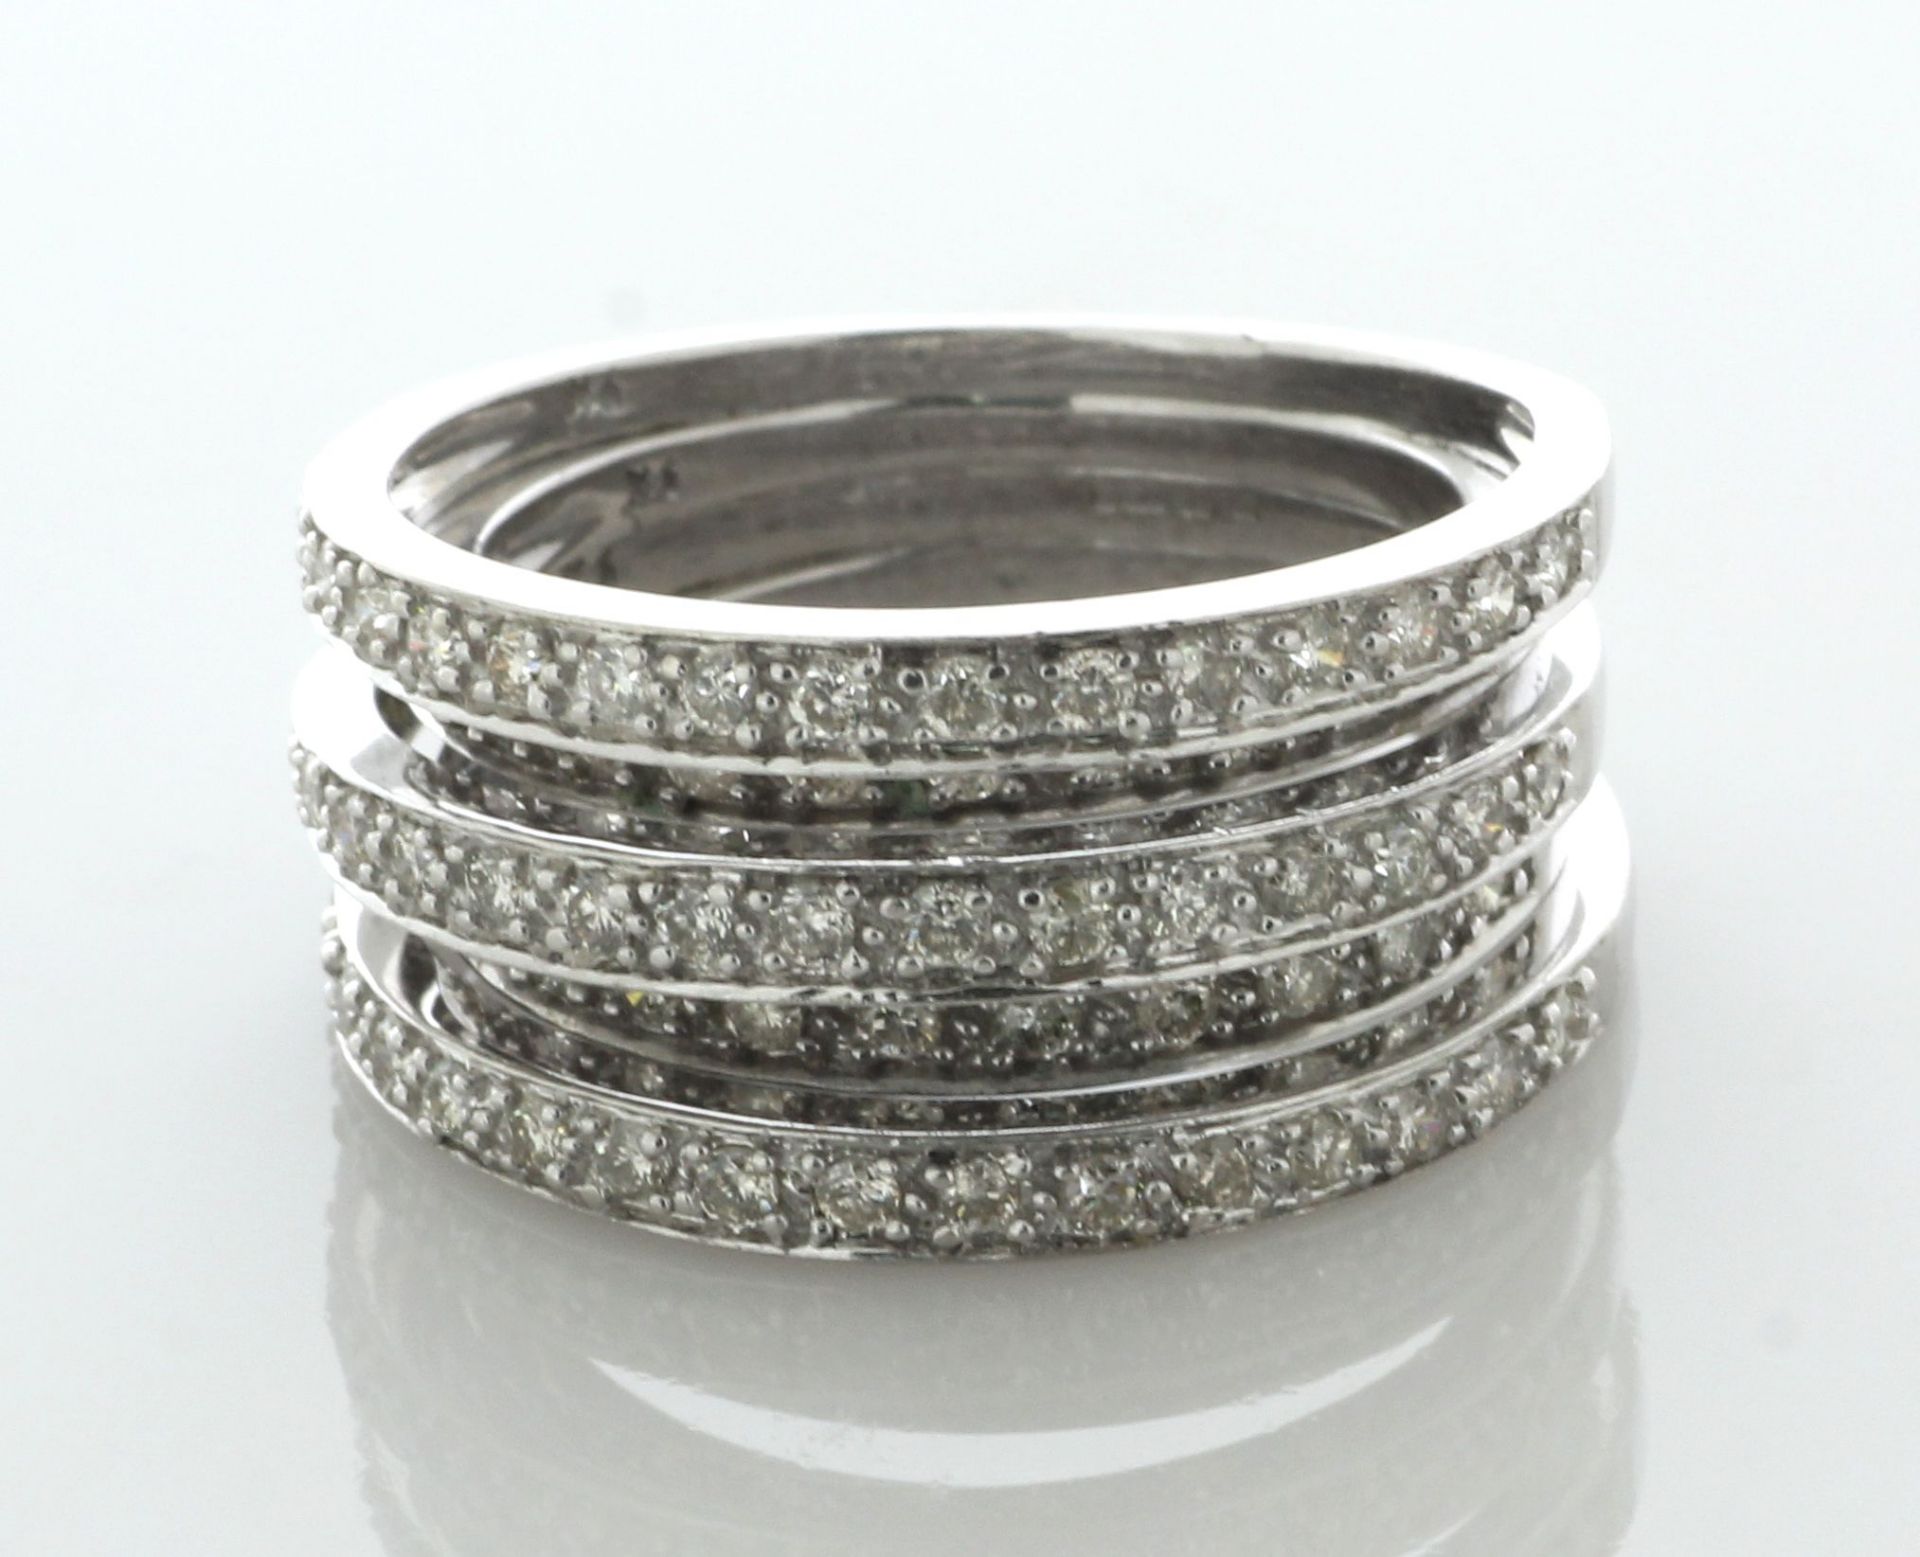 9ct White Gold Multi-Row Diamond Ring 1.10 Carats - Valued By AGI £3,265.00 - Five rows of round